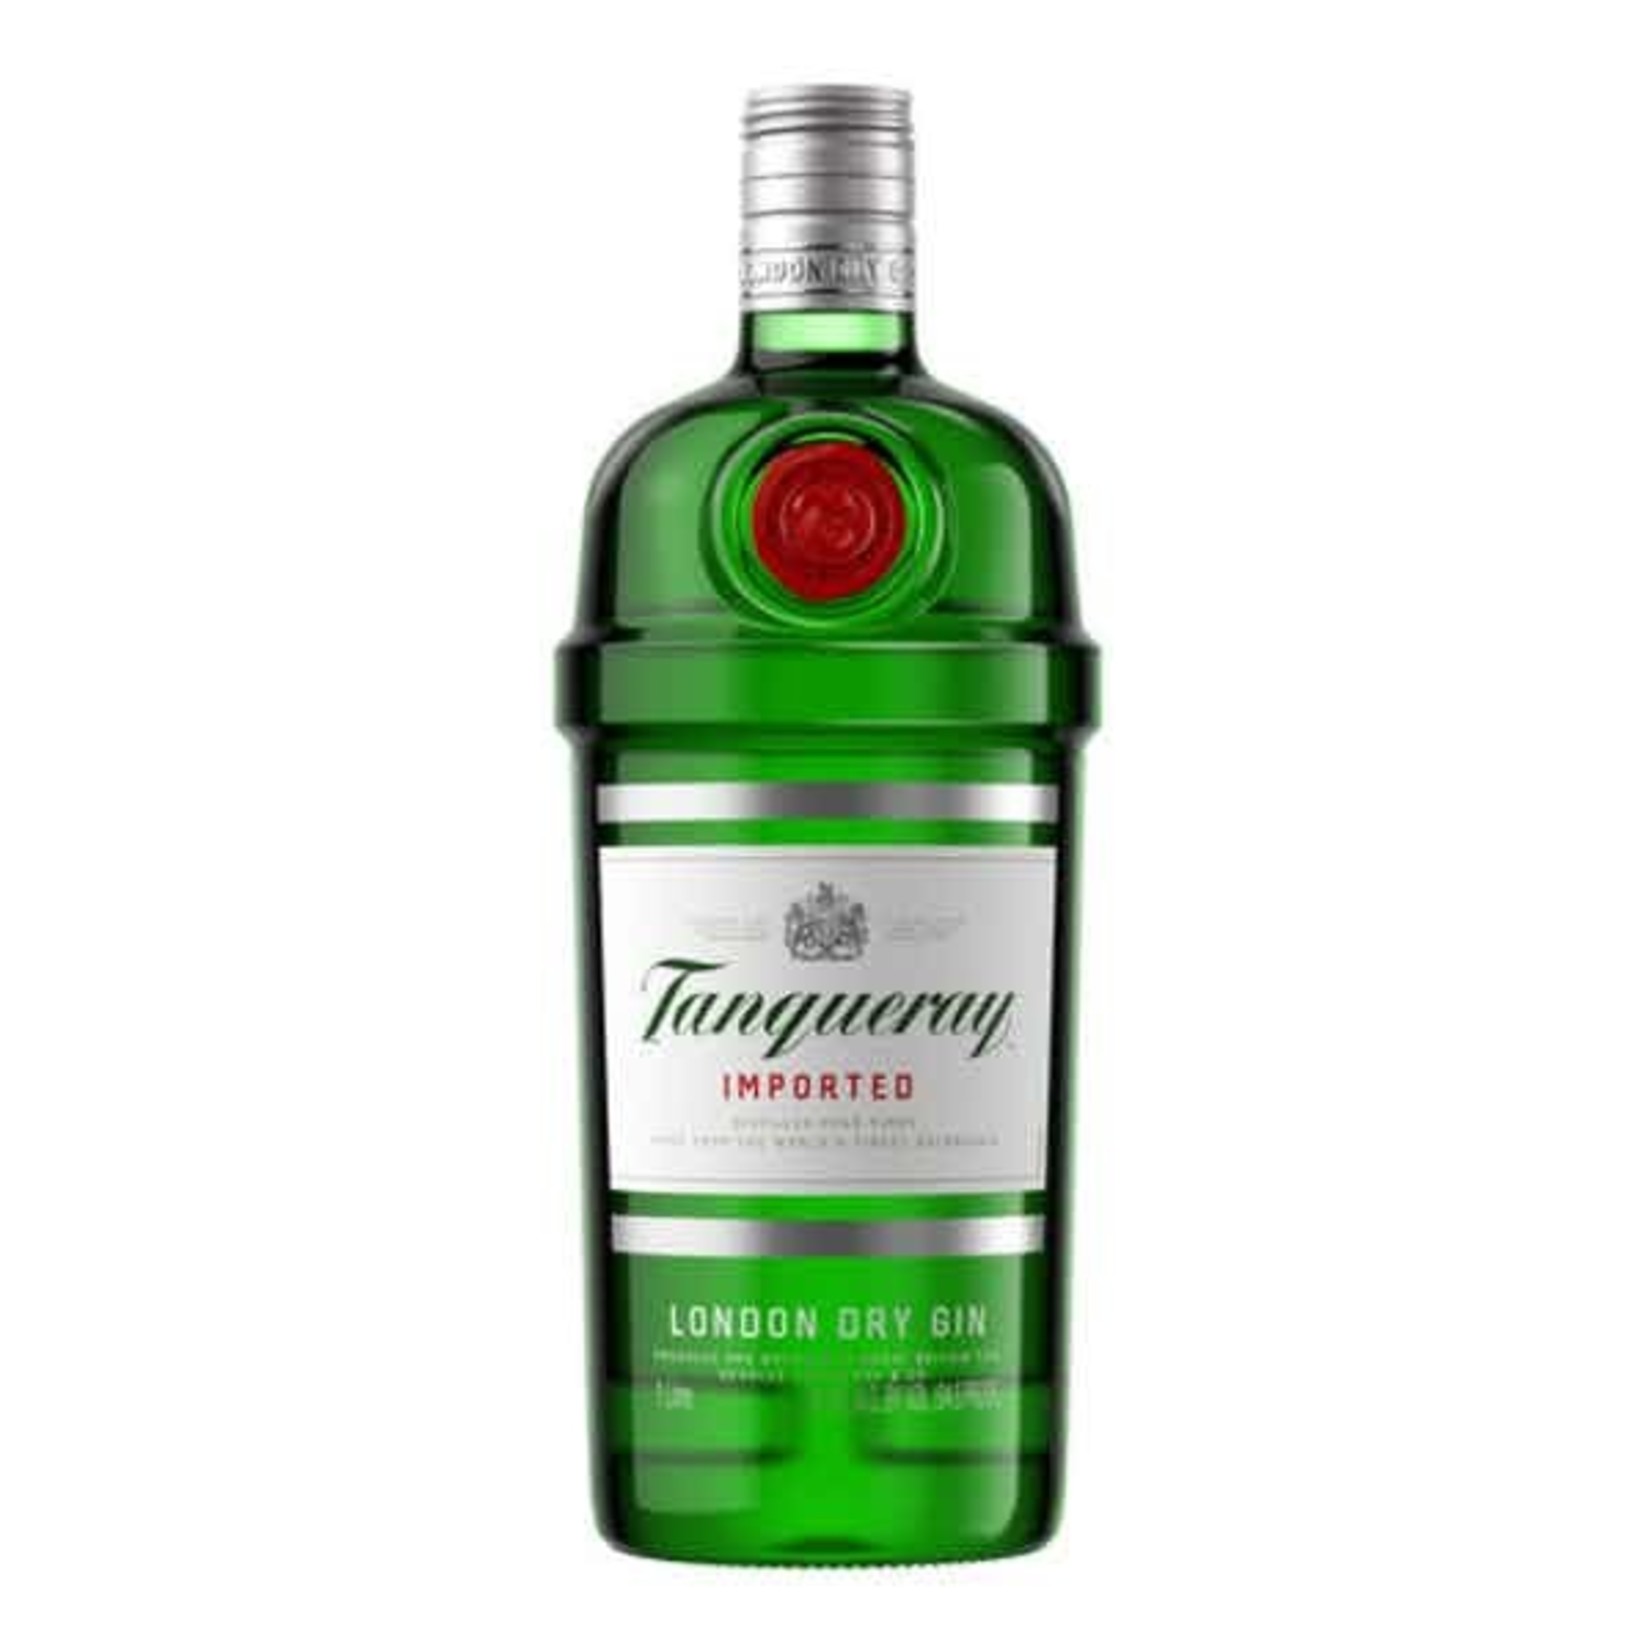 Tanqueray Tanqueray London Dry Gin, (94.6 Proof)